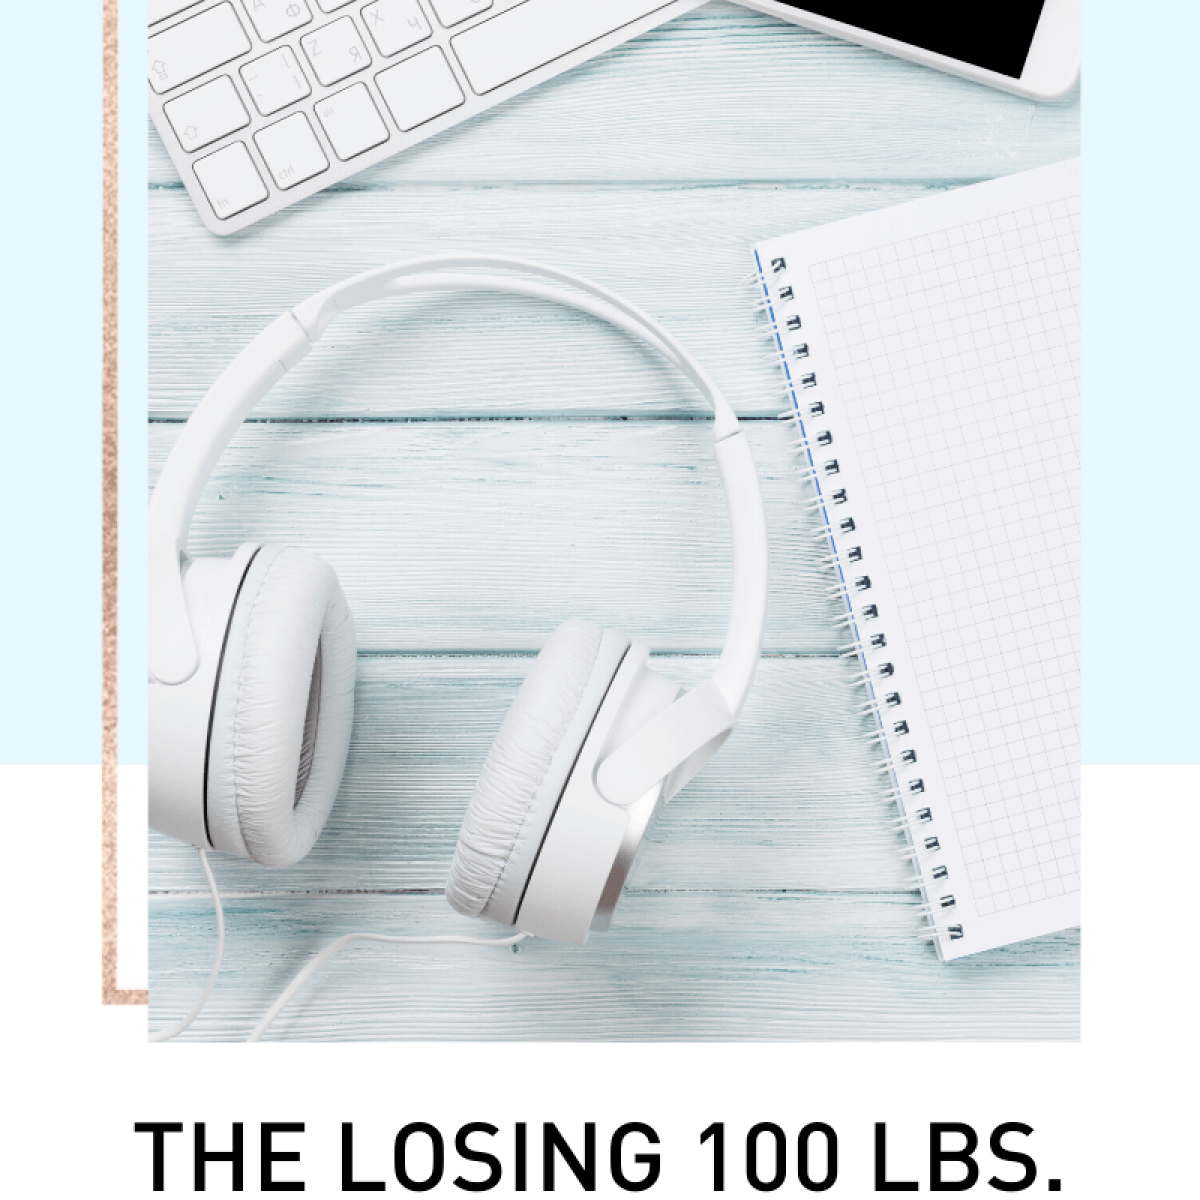 The losing 100 pounds during a crisis podcast playlist.